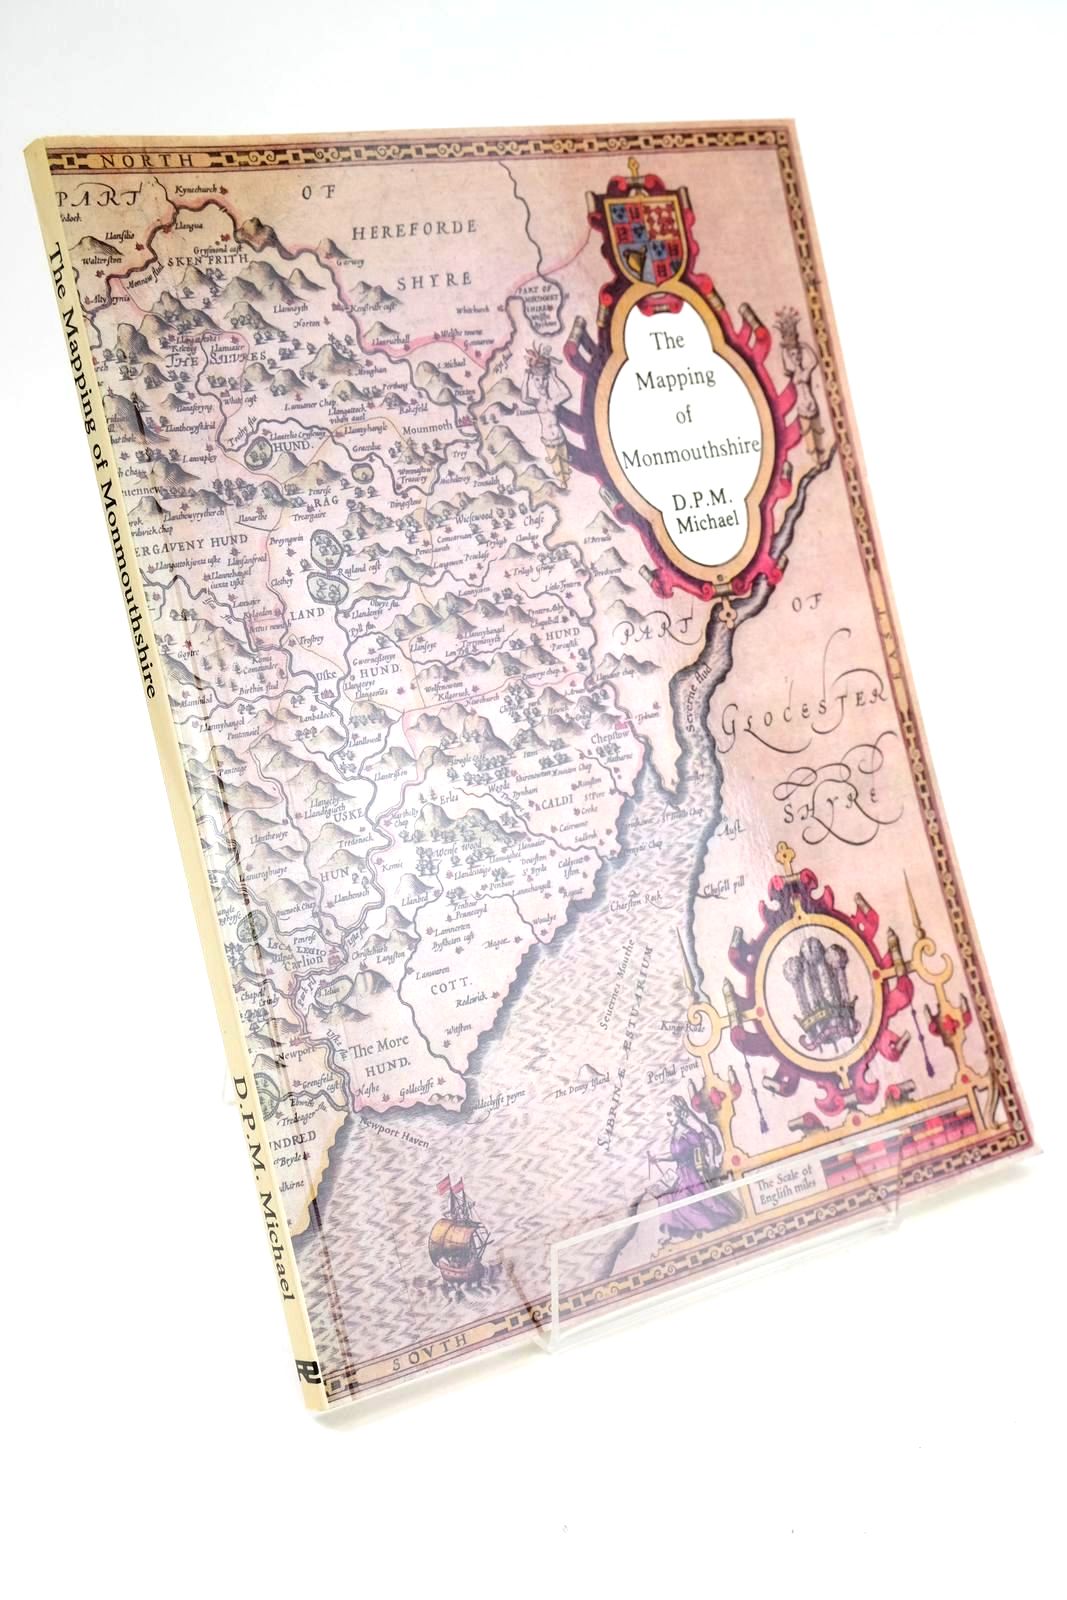 Photo of THE MAPPING OF MONMOUTHSHIRE written by Michael, D.P.M. published by Regional Publications (STOCK CODE: 1324177)  for sale by Stella & Rose's Books